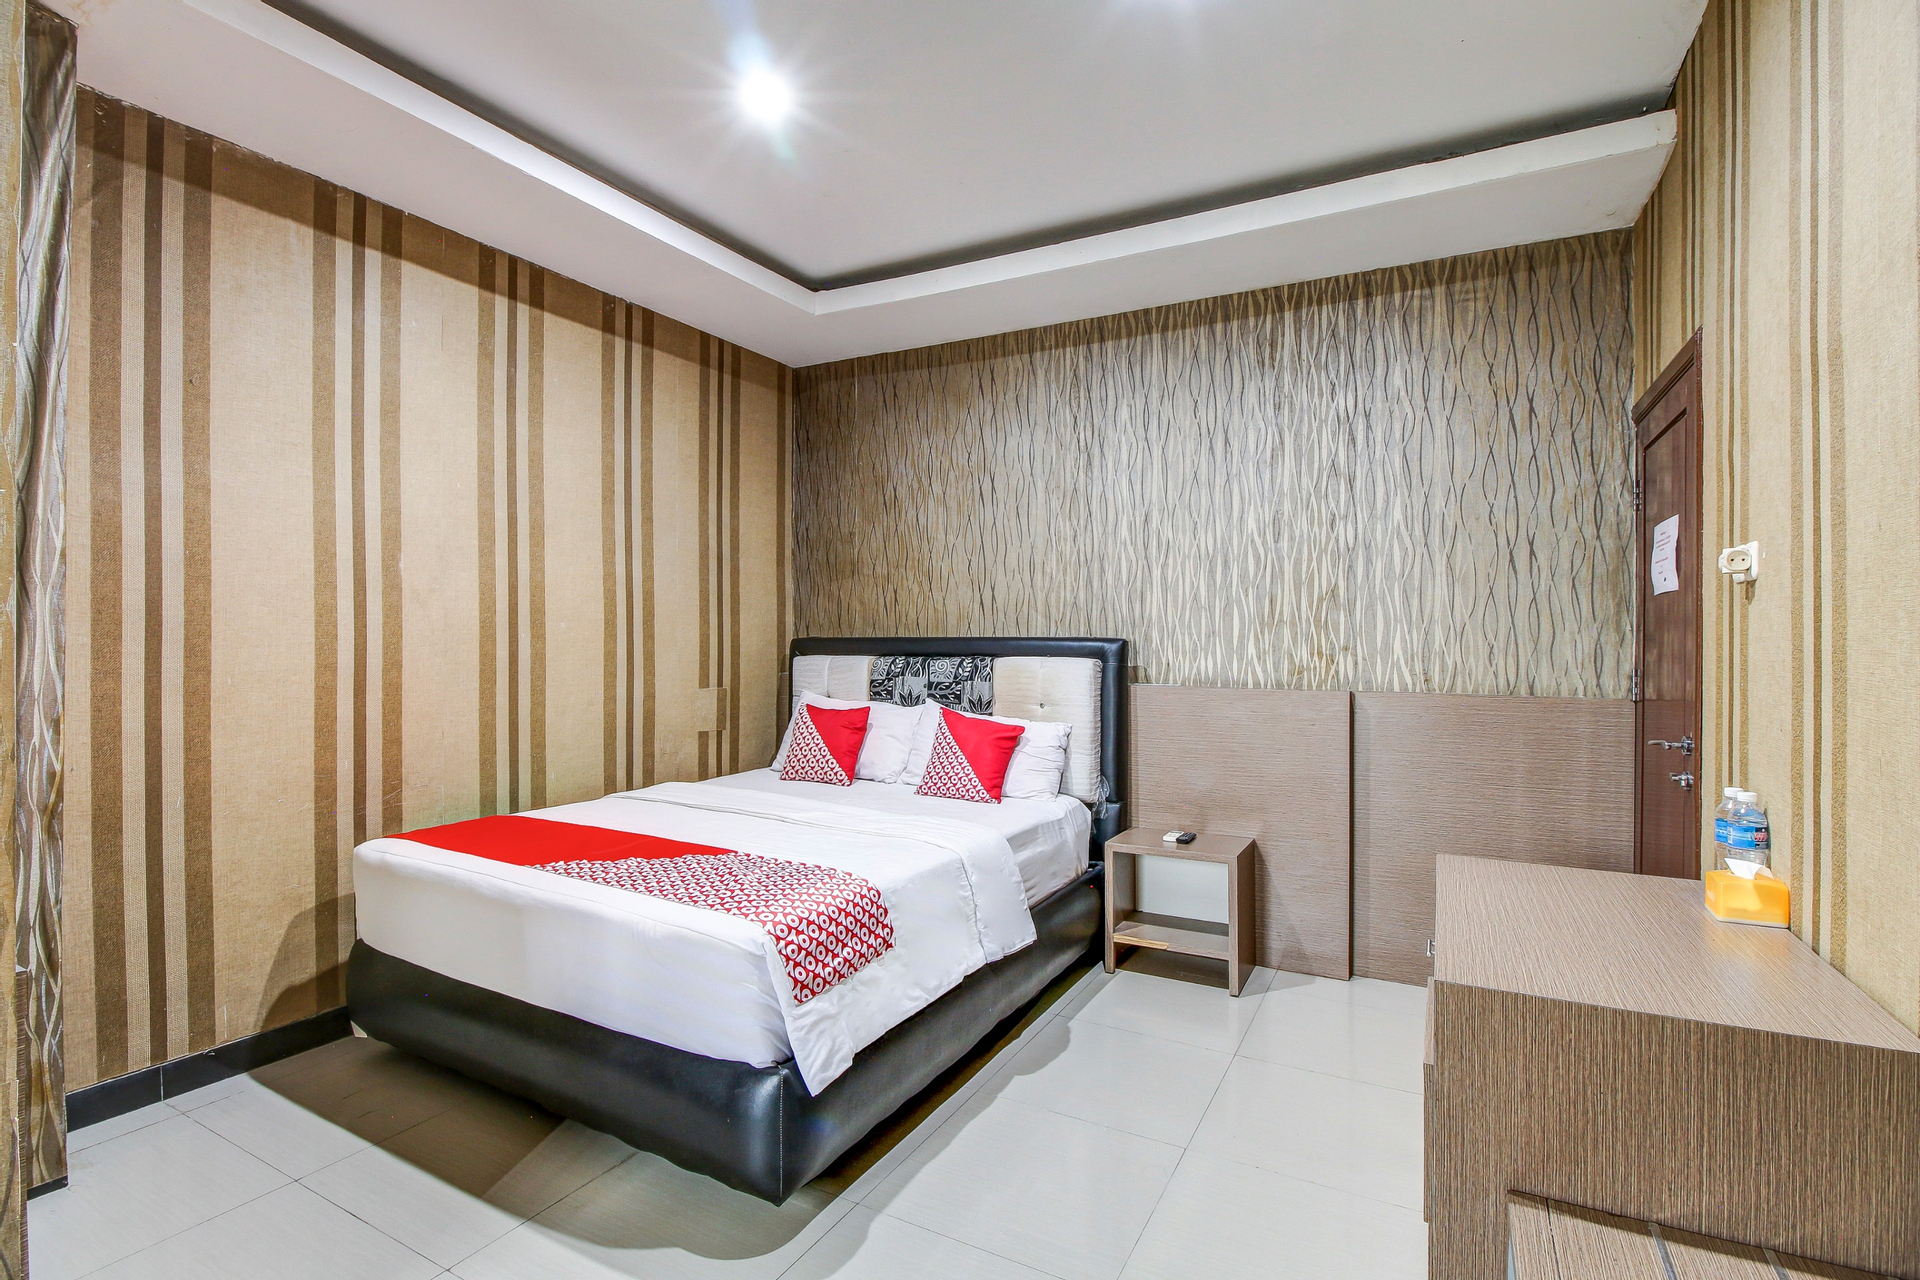 Bedroom 1, OYO 90866 Wilven Guest House Syariah (temporarily closed), Palu